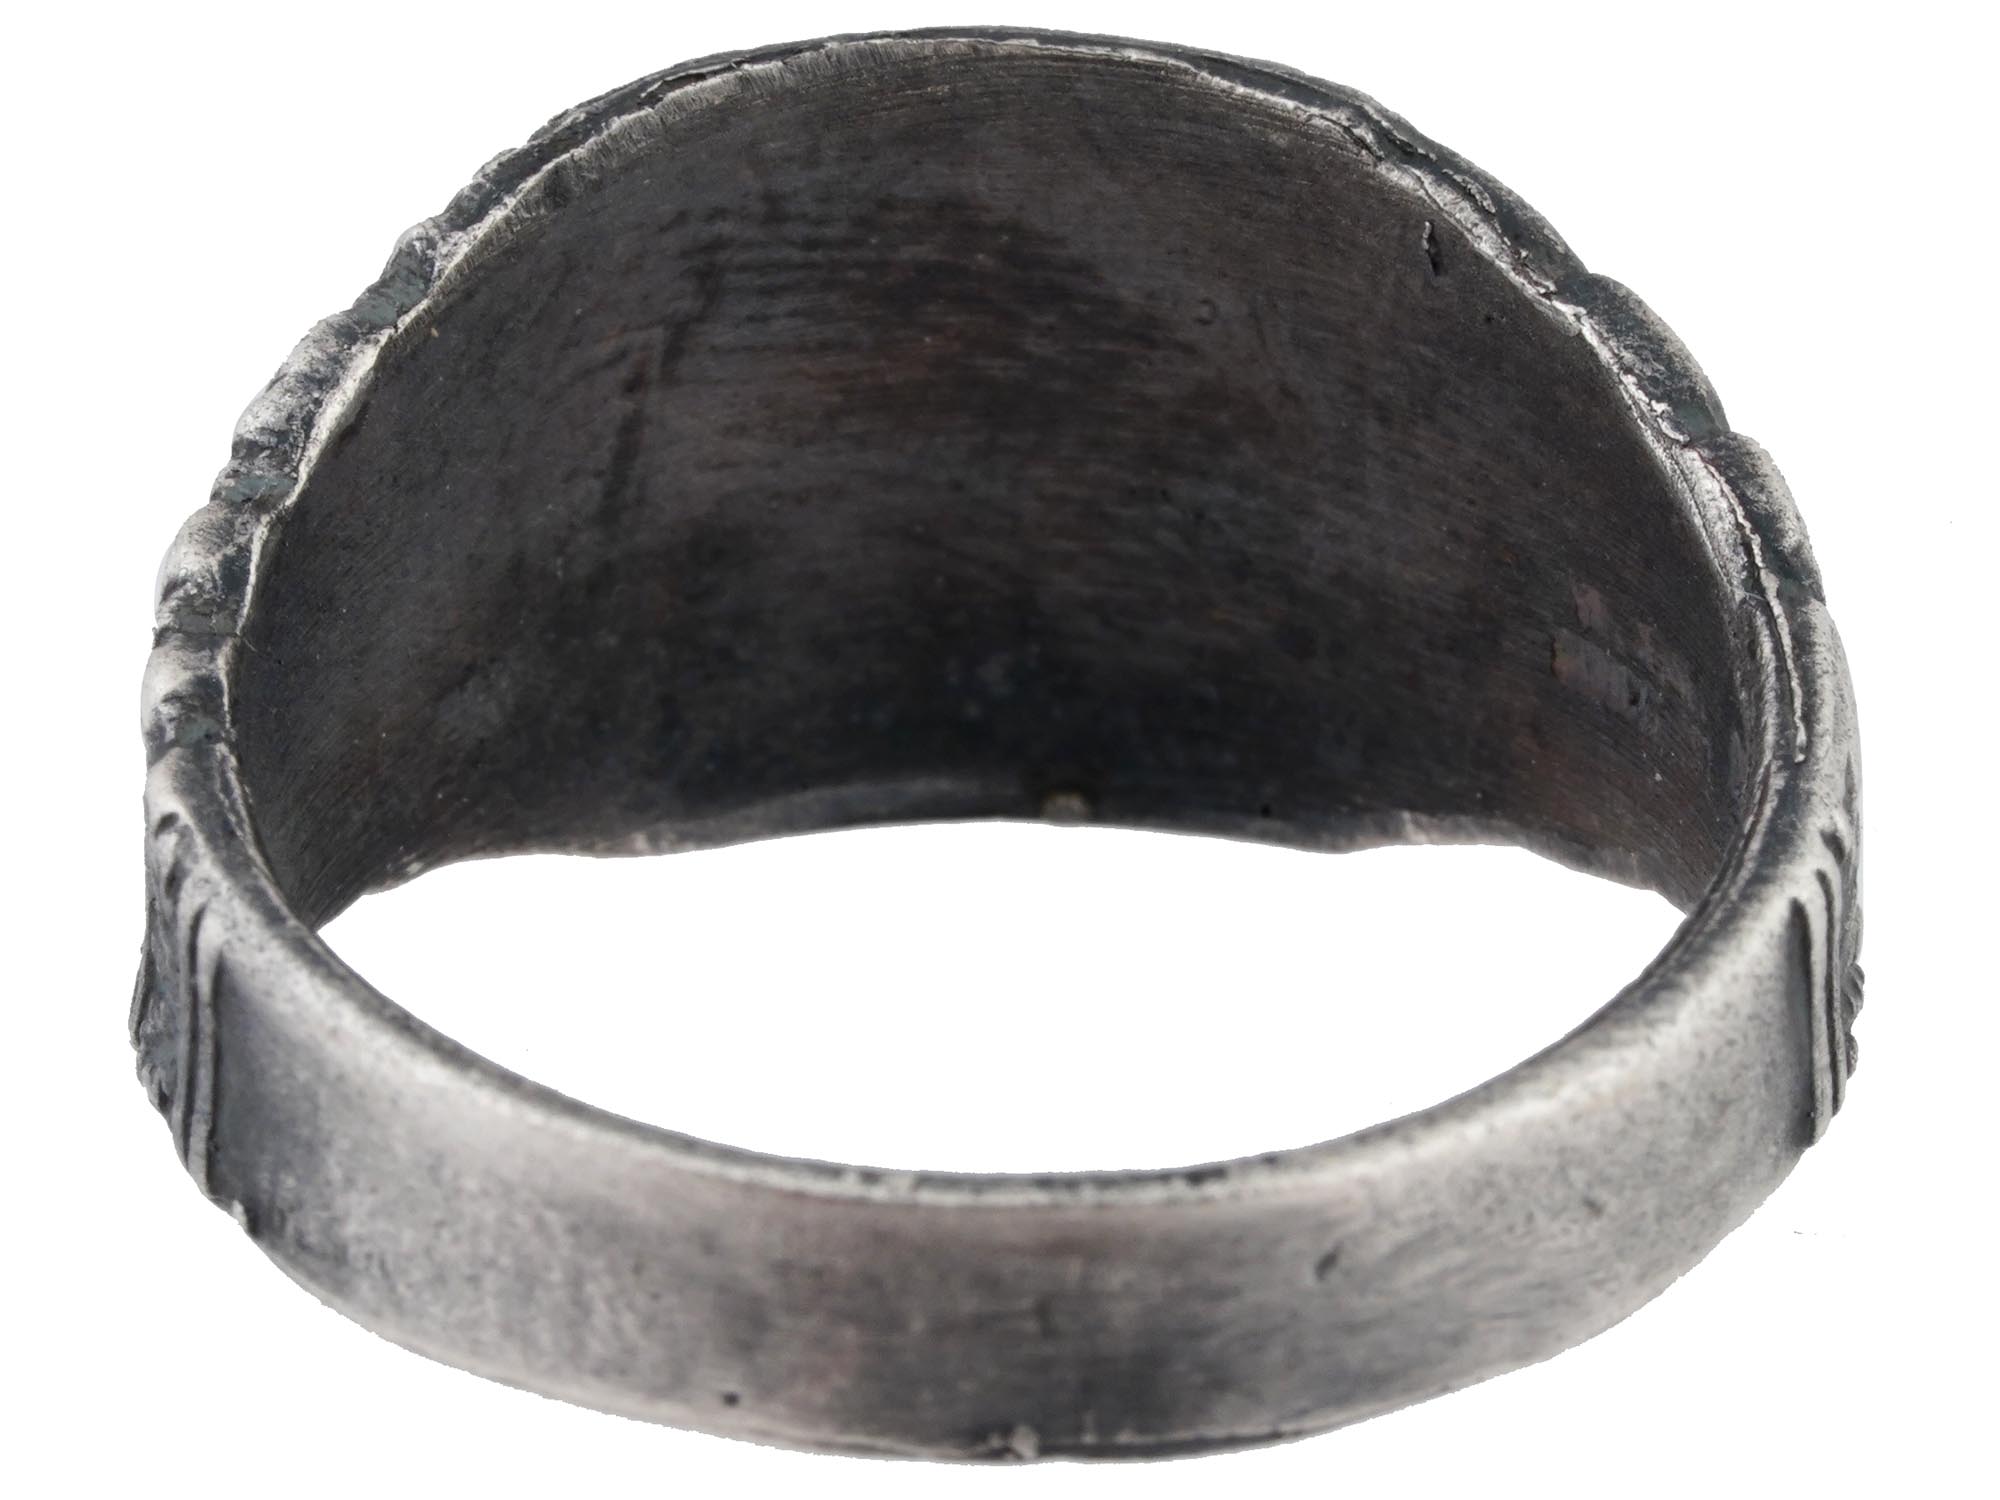 WWII GERMAN TYPE WAFFEN SS WIKING NORDLAND SILVER RING PIC-3